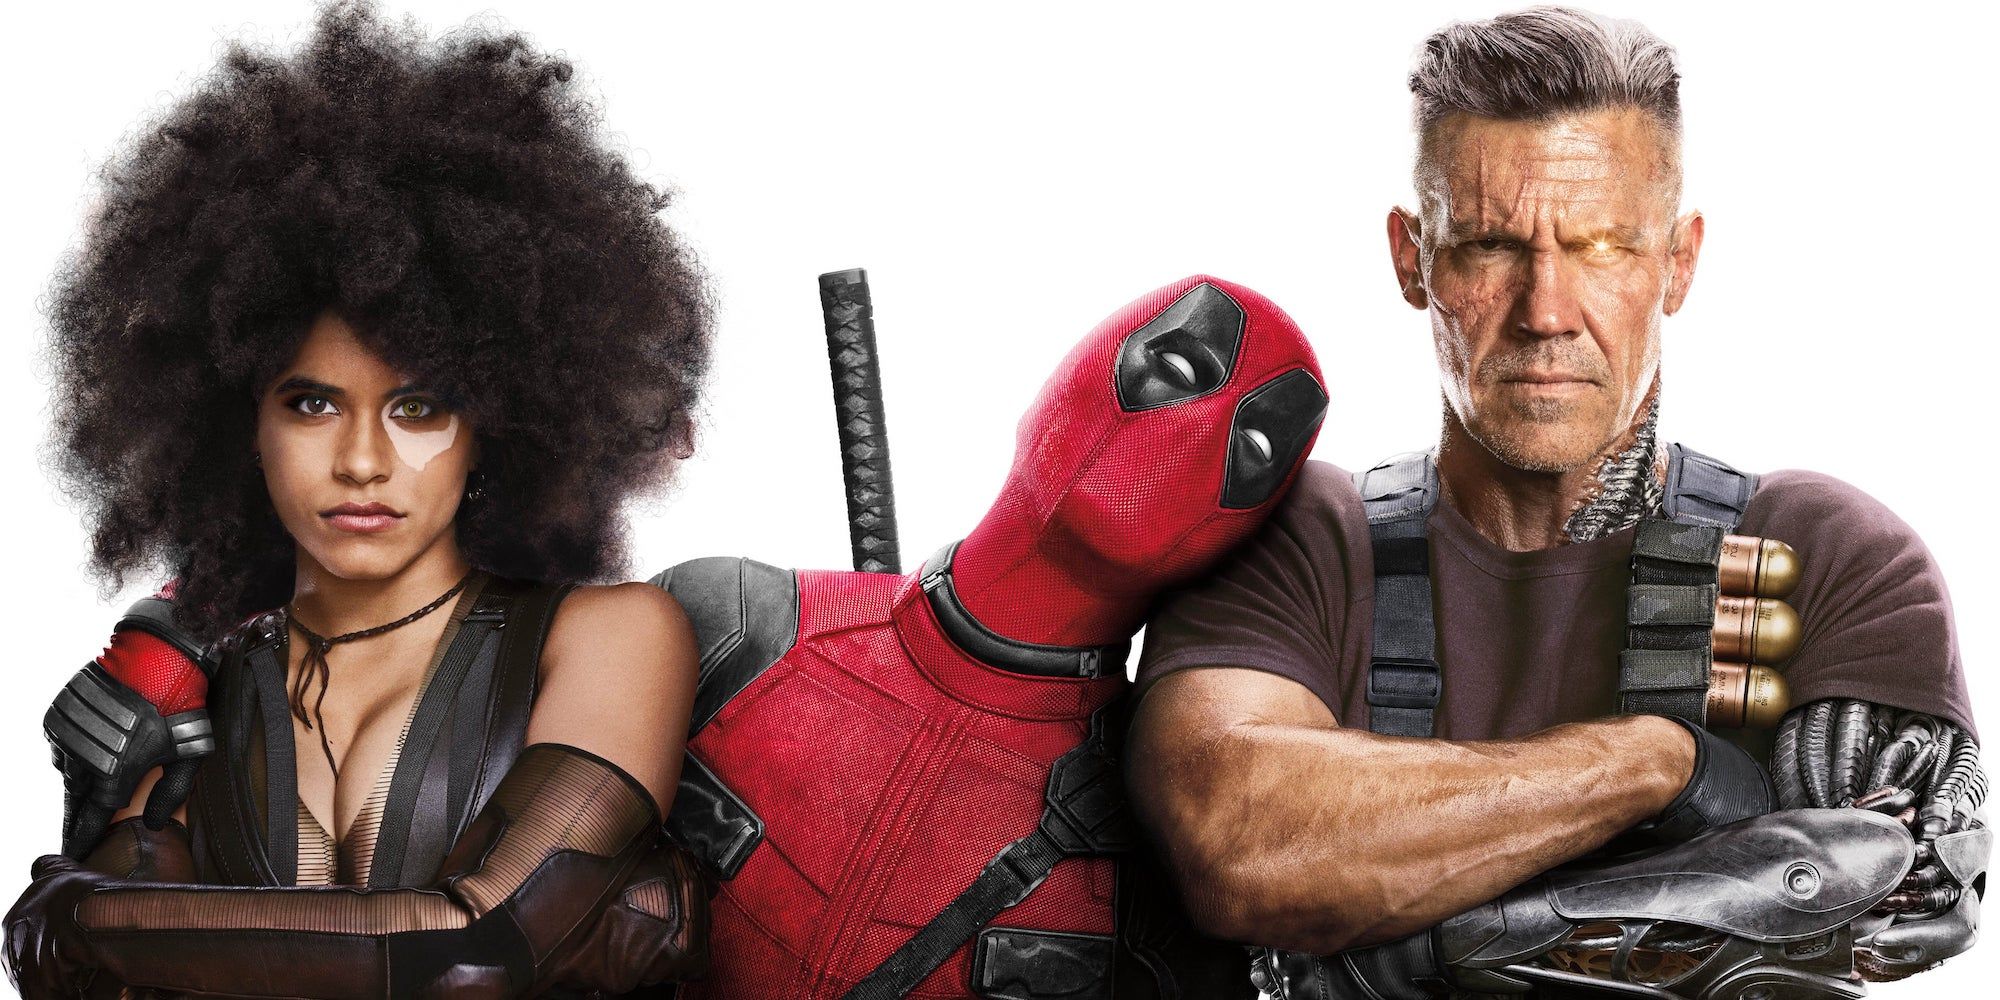 Deadpool with Domino and Cable in Deadpool 2